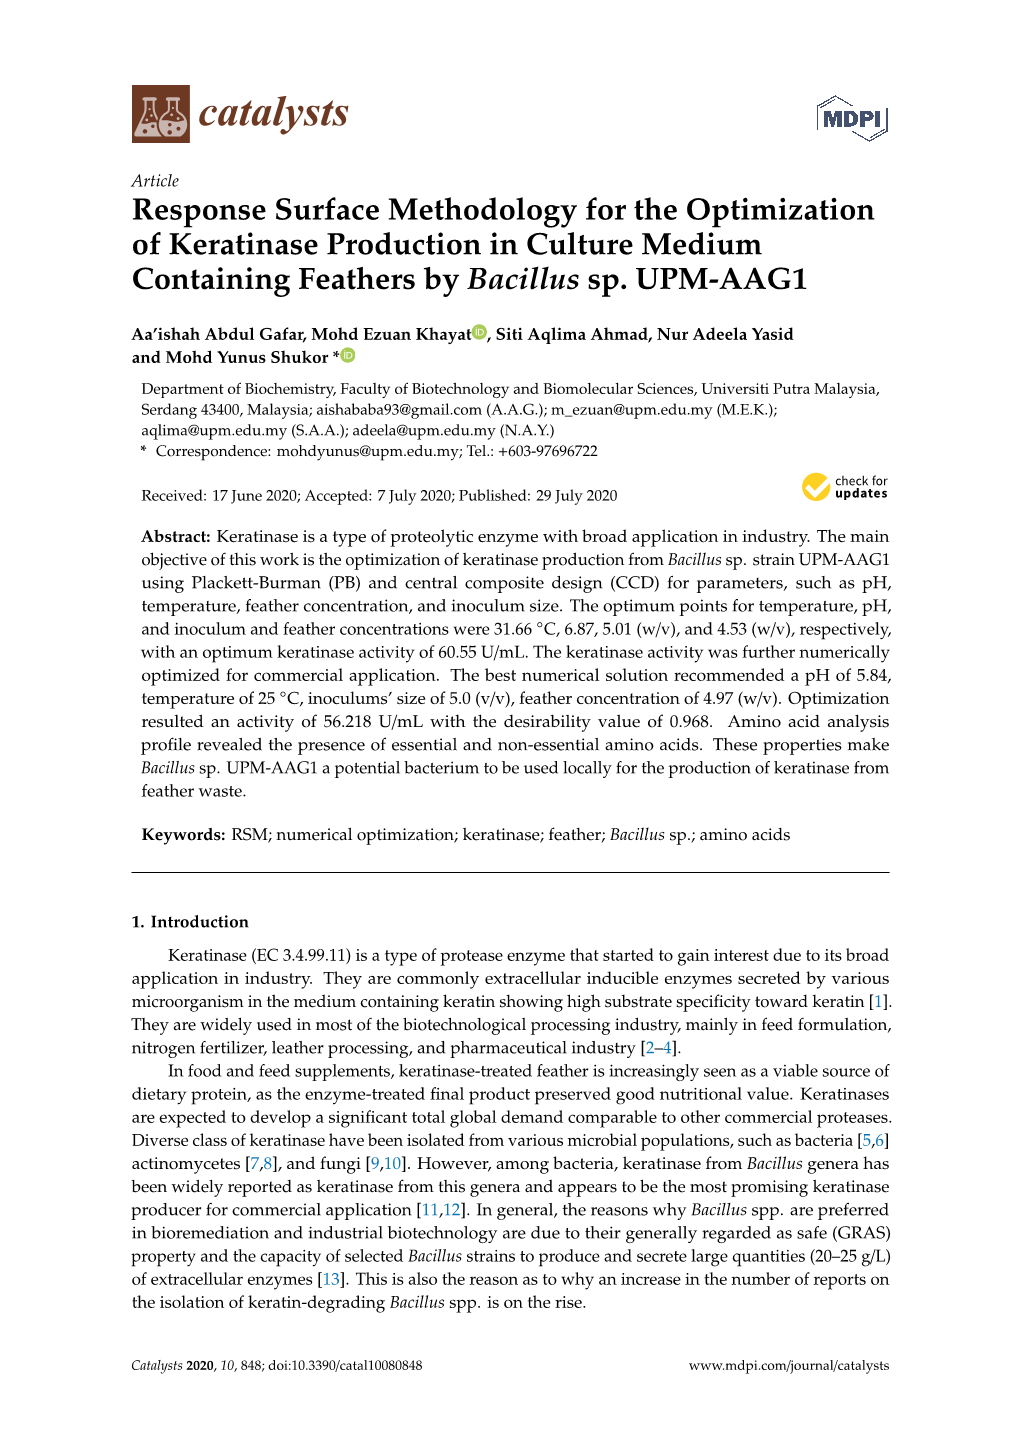 Response Surface Methodology for the Optimization of Keratinase Production in Culture Medium Containing Feathers by Bacillus Sp